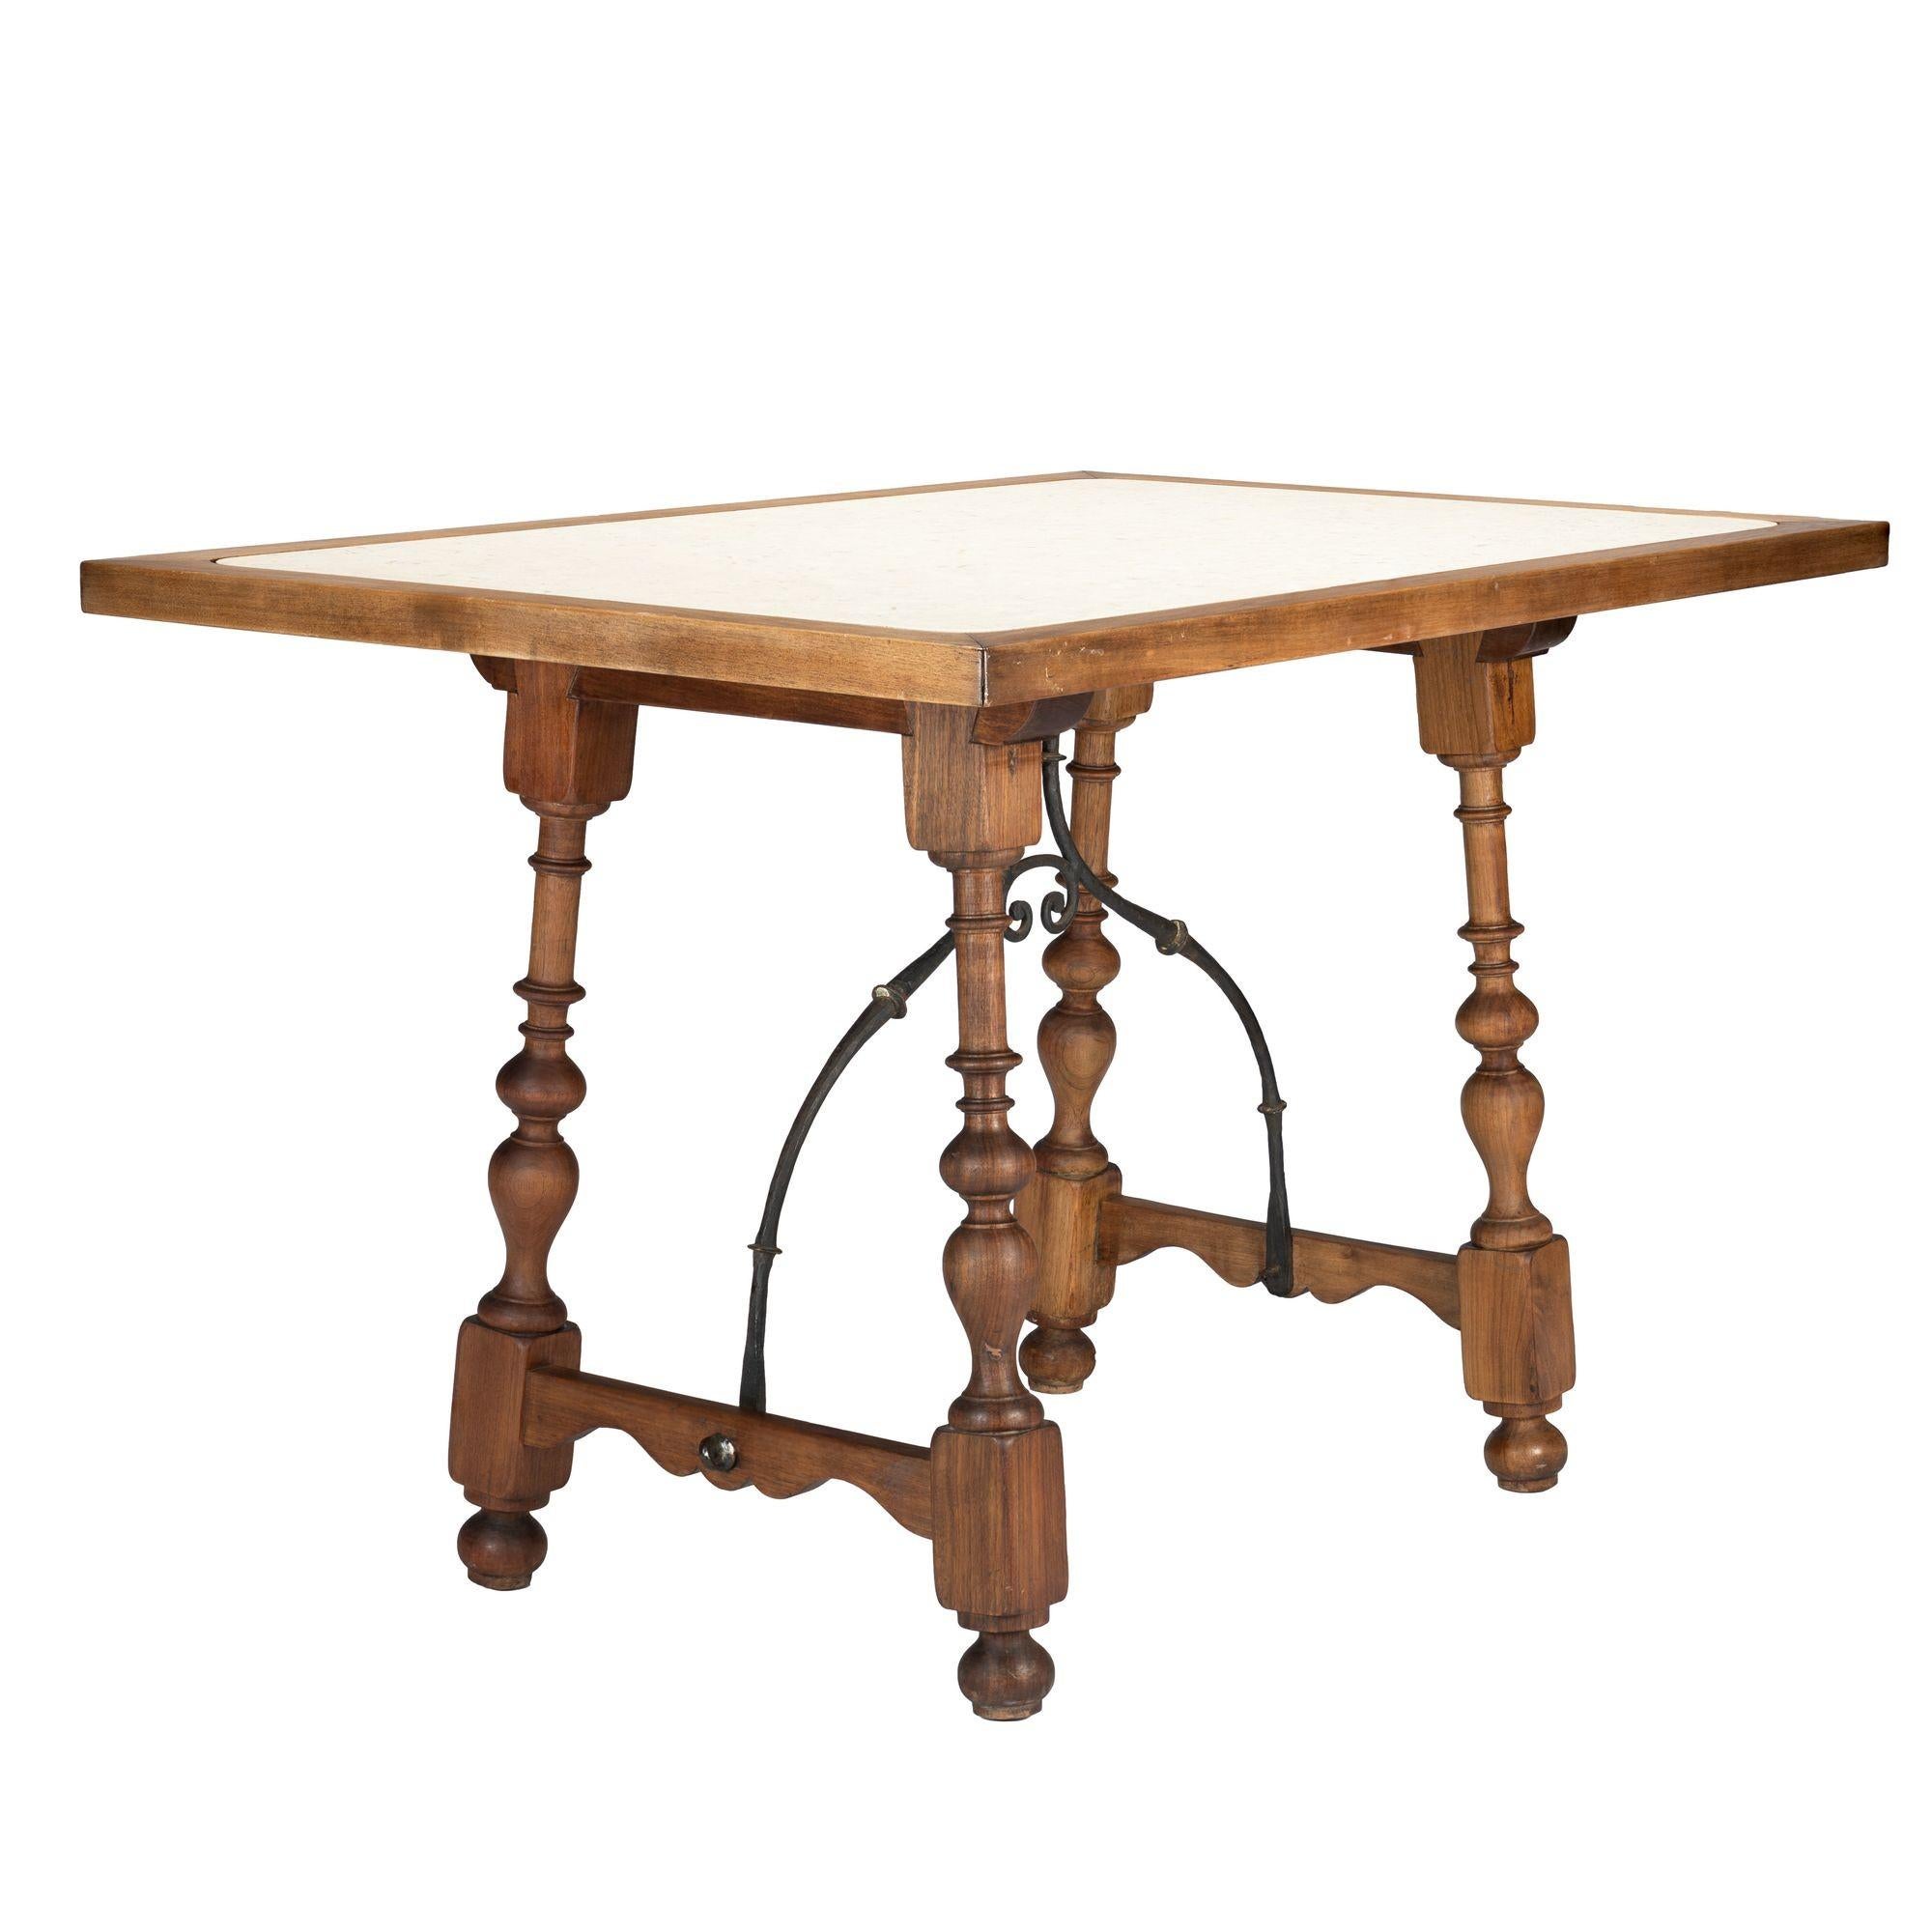 20th Century Walnut and travertine marble top table in the Spanish Baroque taste, 1925 For Sale